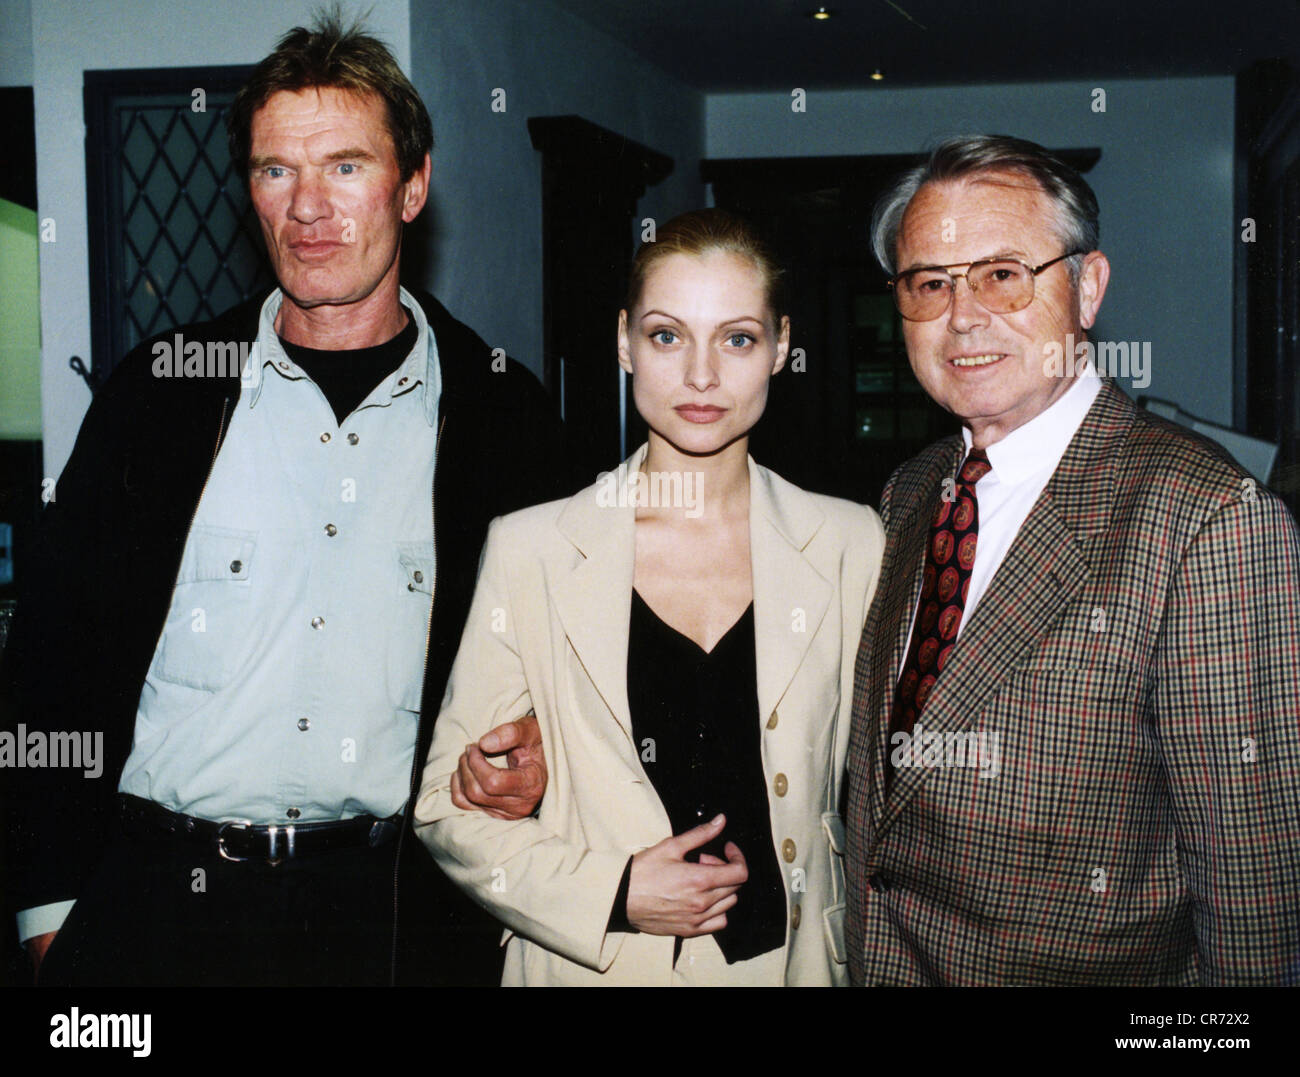 Zimmermann, Eduard, 4.2.1929 - 19.9.2009, German journalist, TV presenter (right), group picture with the actor Burkhard Driest and the actress Catherine Flemming, April 1996, Stock Photo